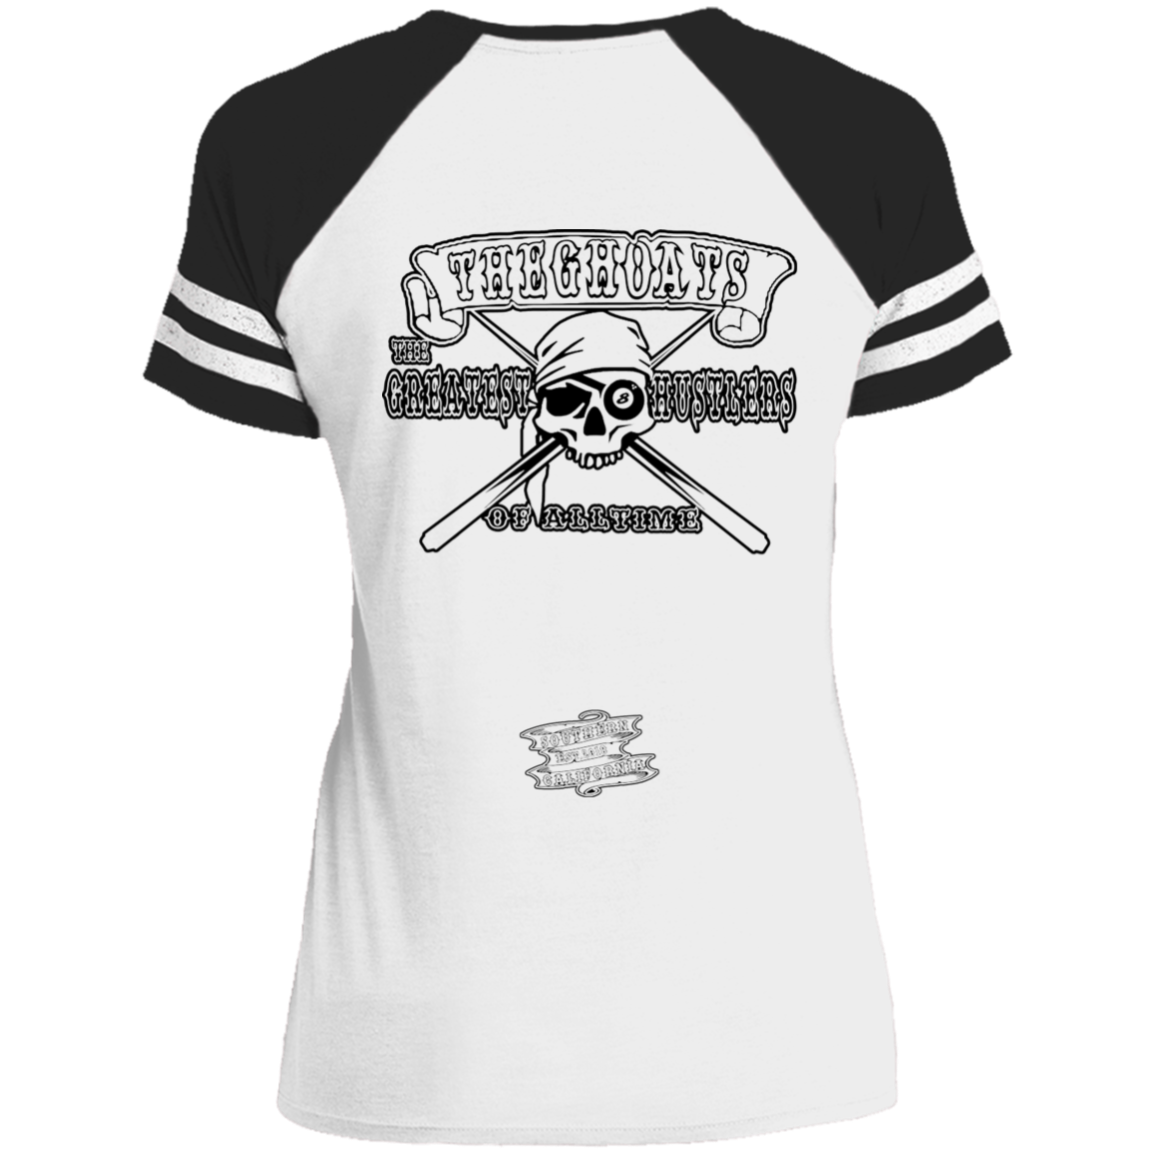 The GHOATS Custom Design. #4 Motorcycle Club Style. Ver 2/2. Ladies' Game V-Neck T-Shirt